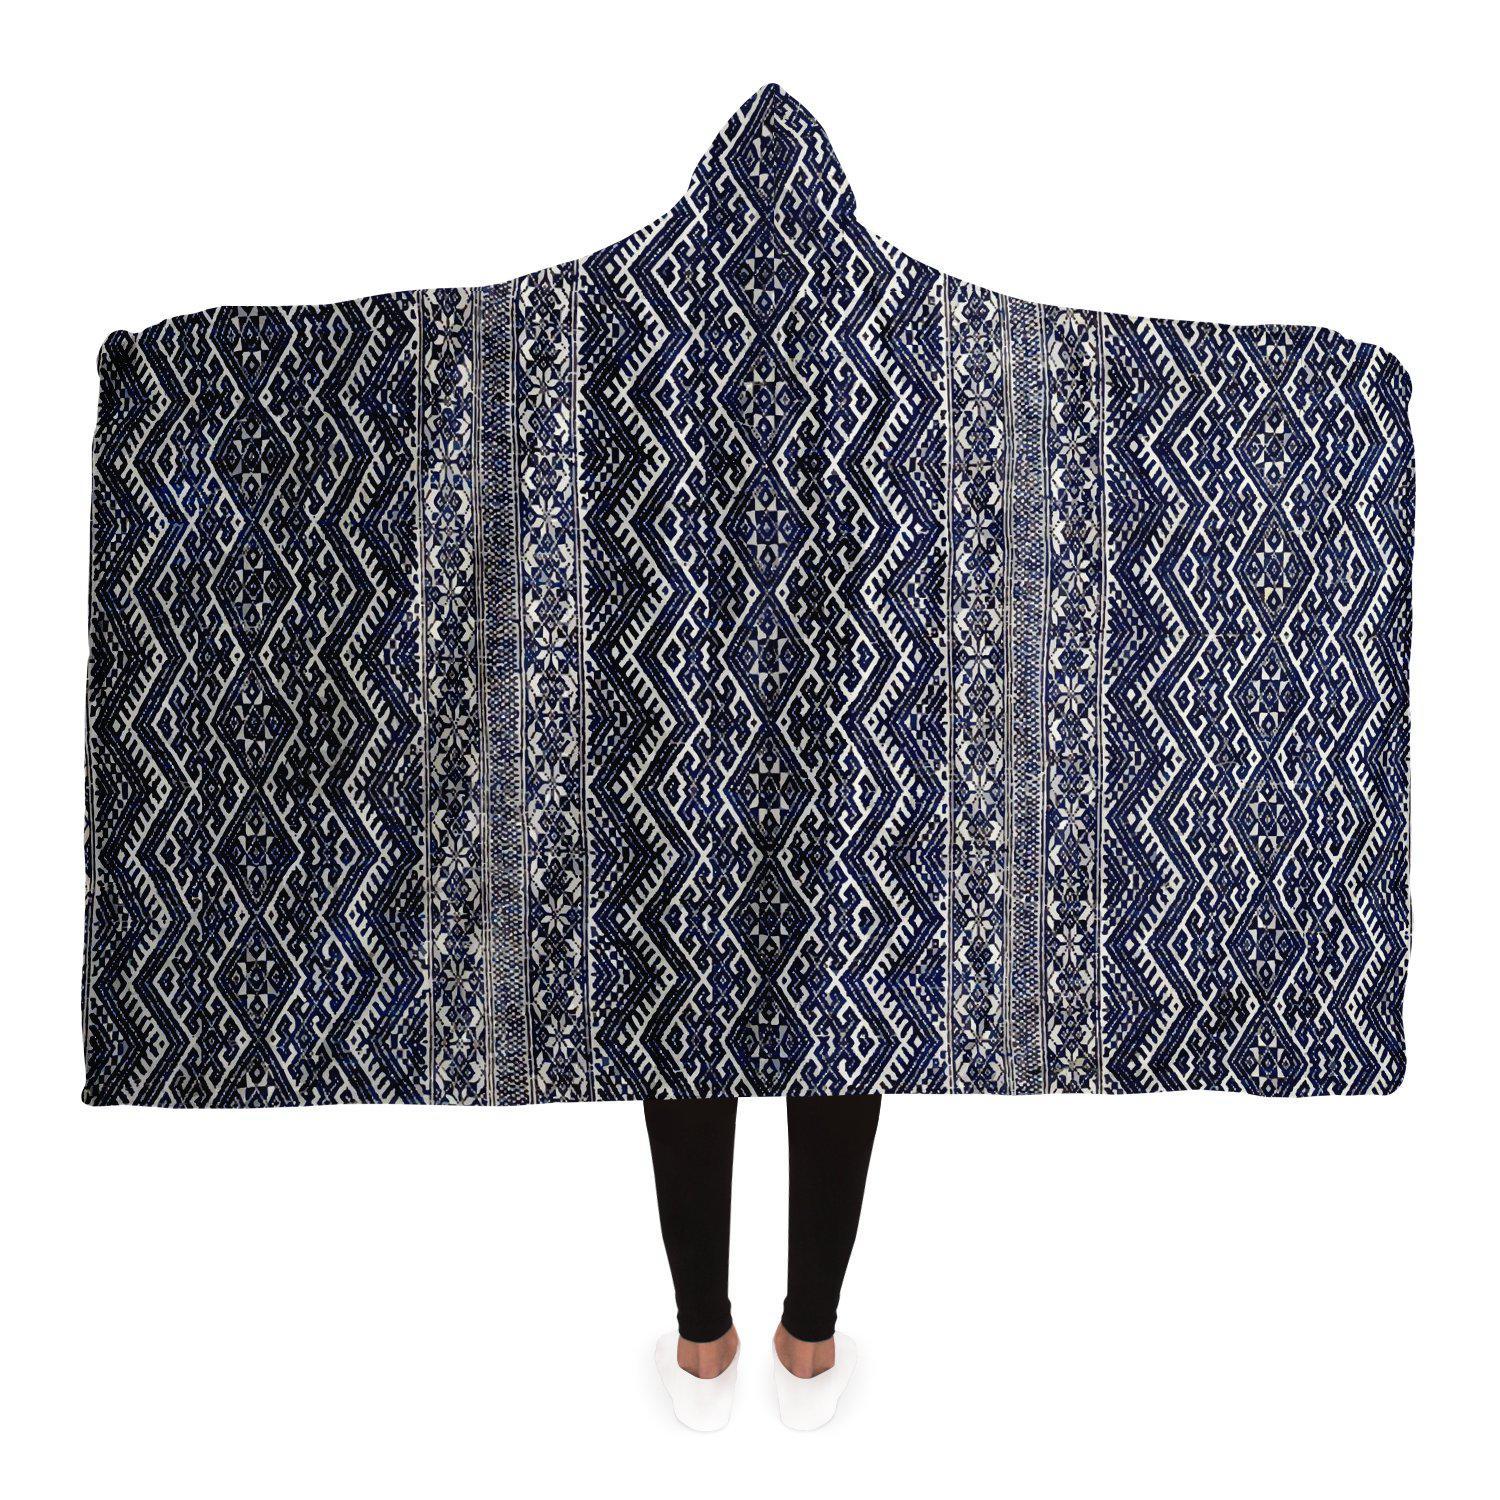 Hooded Blanket - AOP Adult / Premium Sherpa Hooded Blanket, Miao Culture Antique, Traditional Design